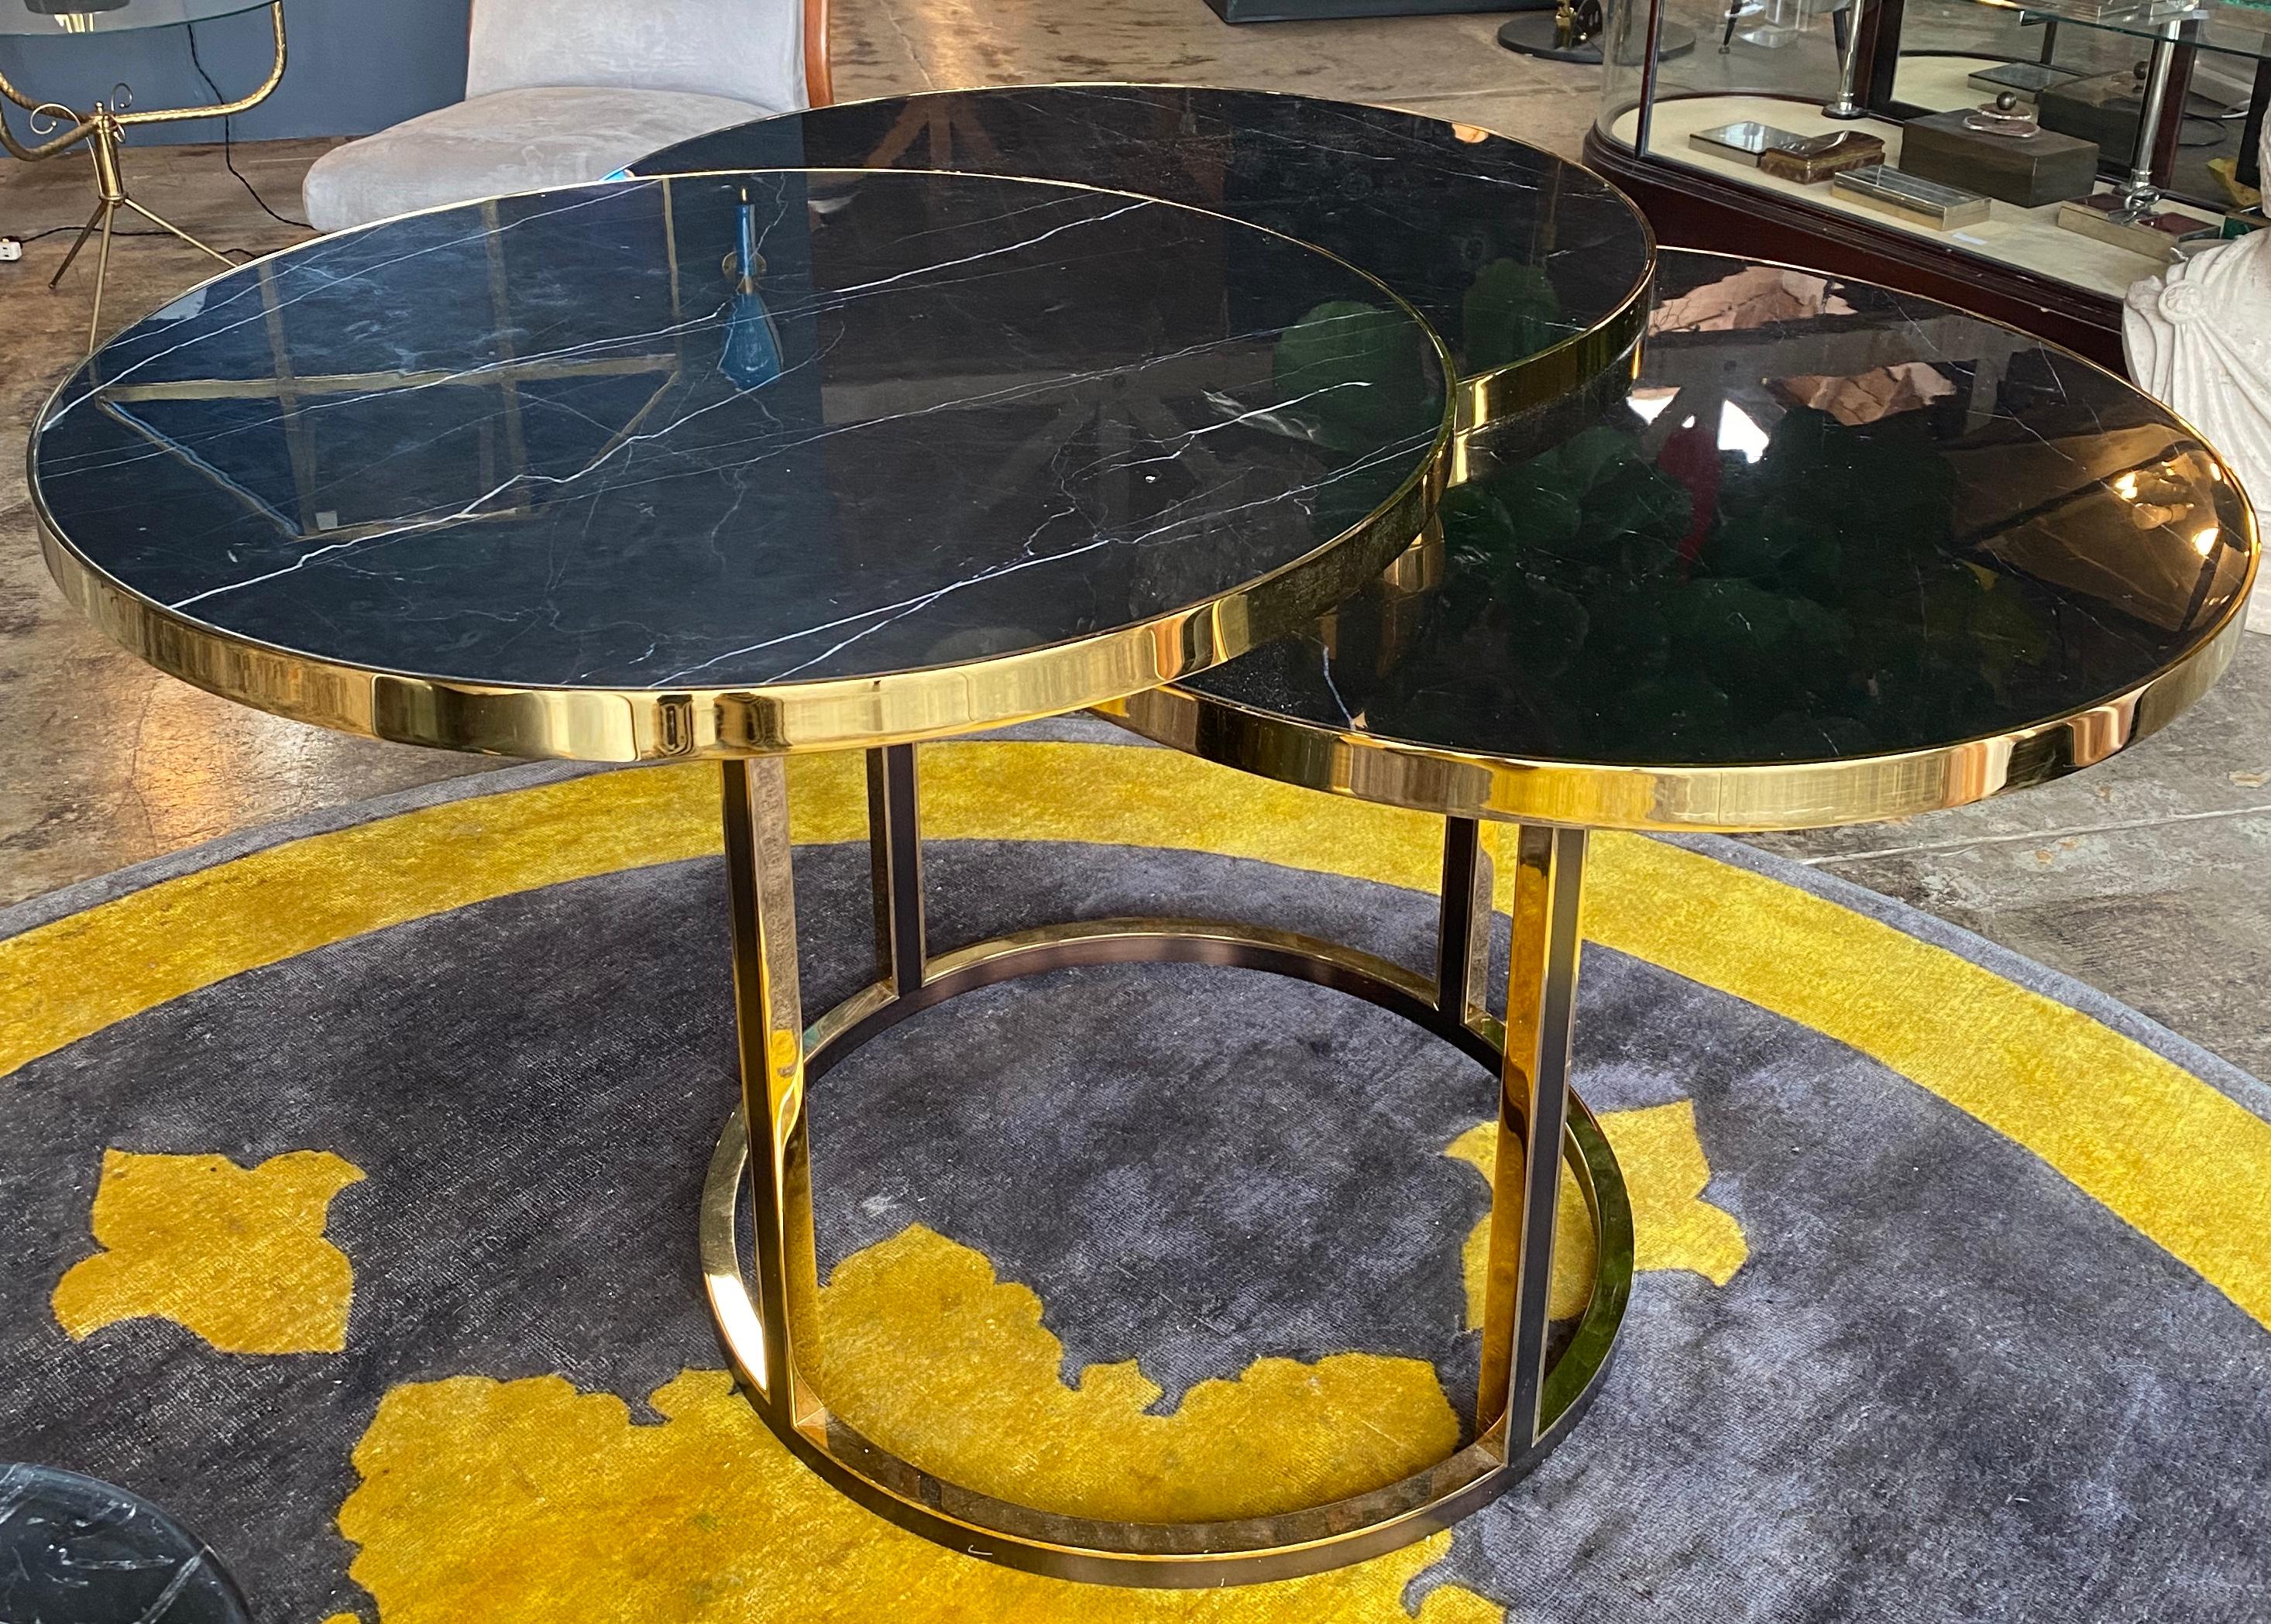 Beautiful Italian side/coffee table made with brass base and black marble, beautiful shape made with 3 circular marble top.
Nothing touches, nothing clashes, which gives this piece of furniture a completely peaceful yet strong expression. A piece